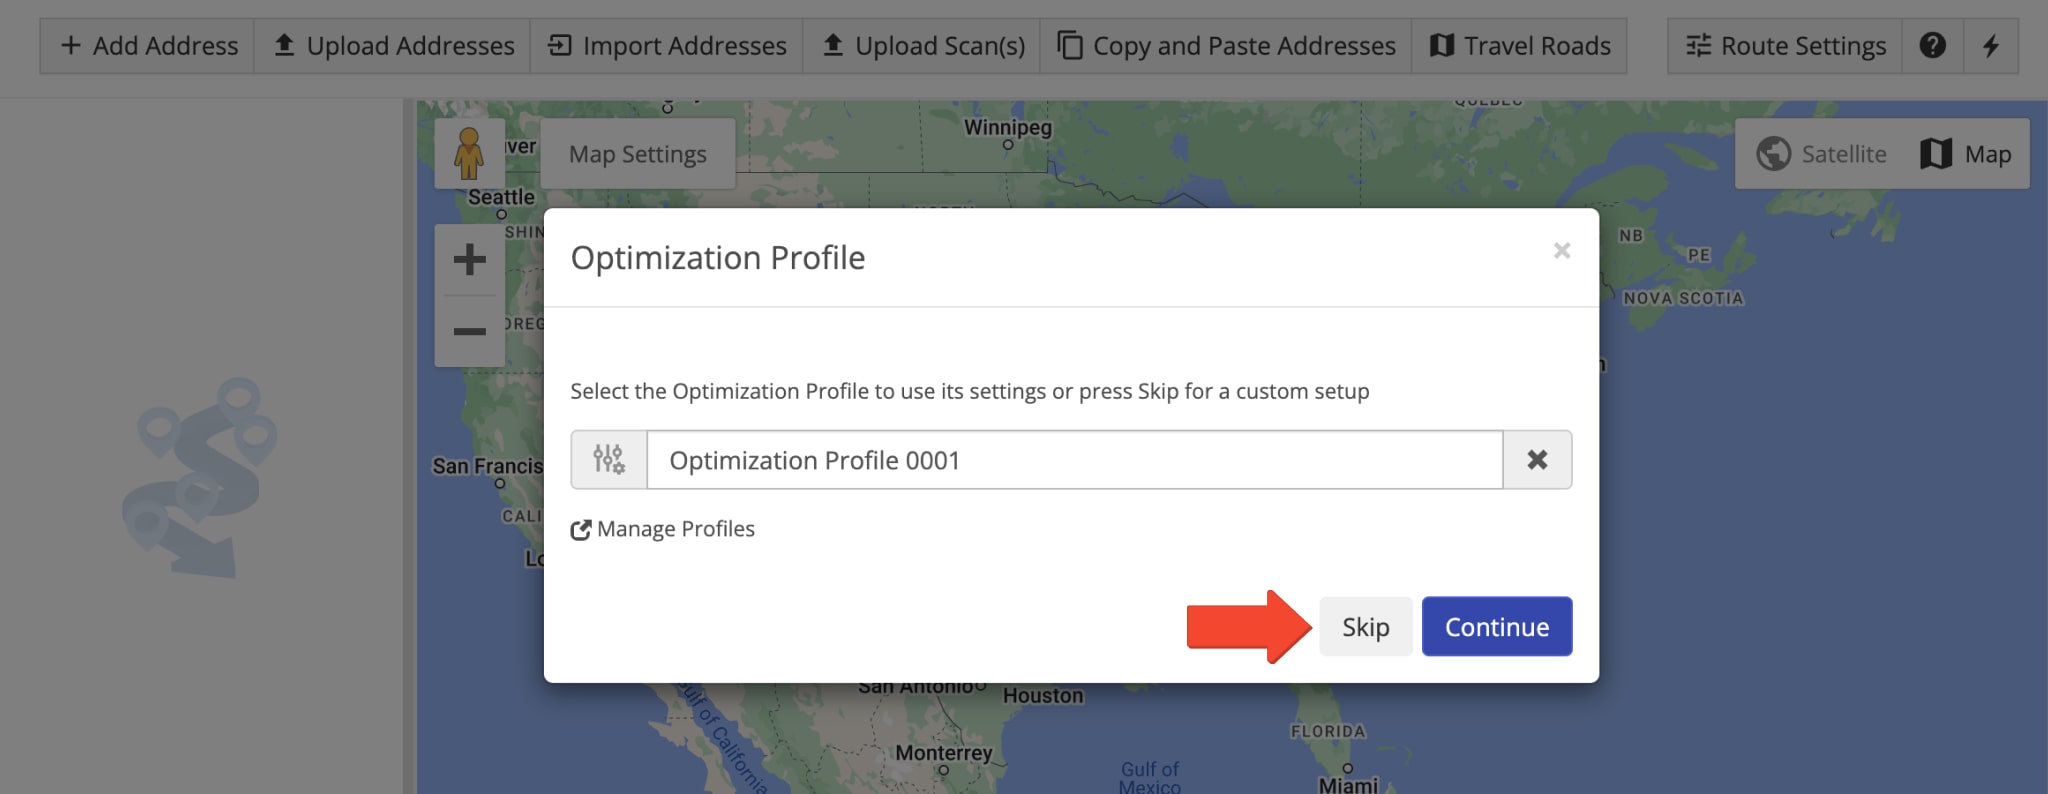 To access manual Optimization Settings when planning routes, click the Skip button when prompted to select an Optimization Profile.